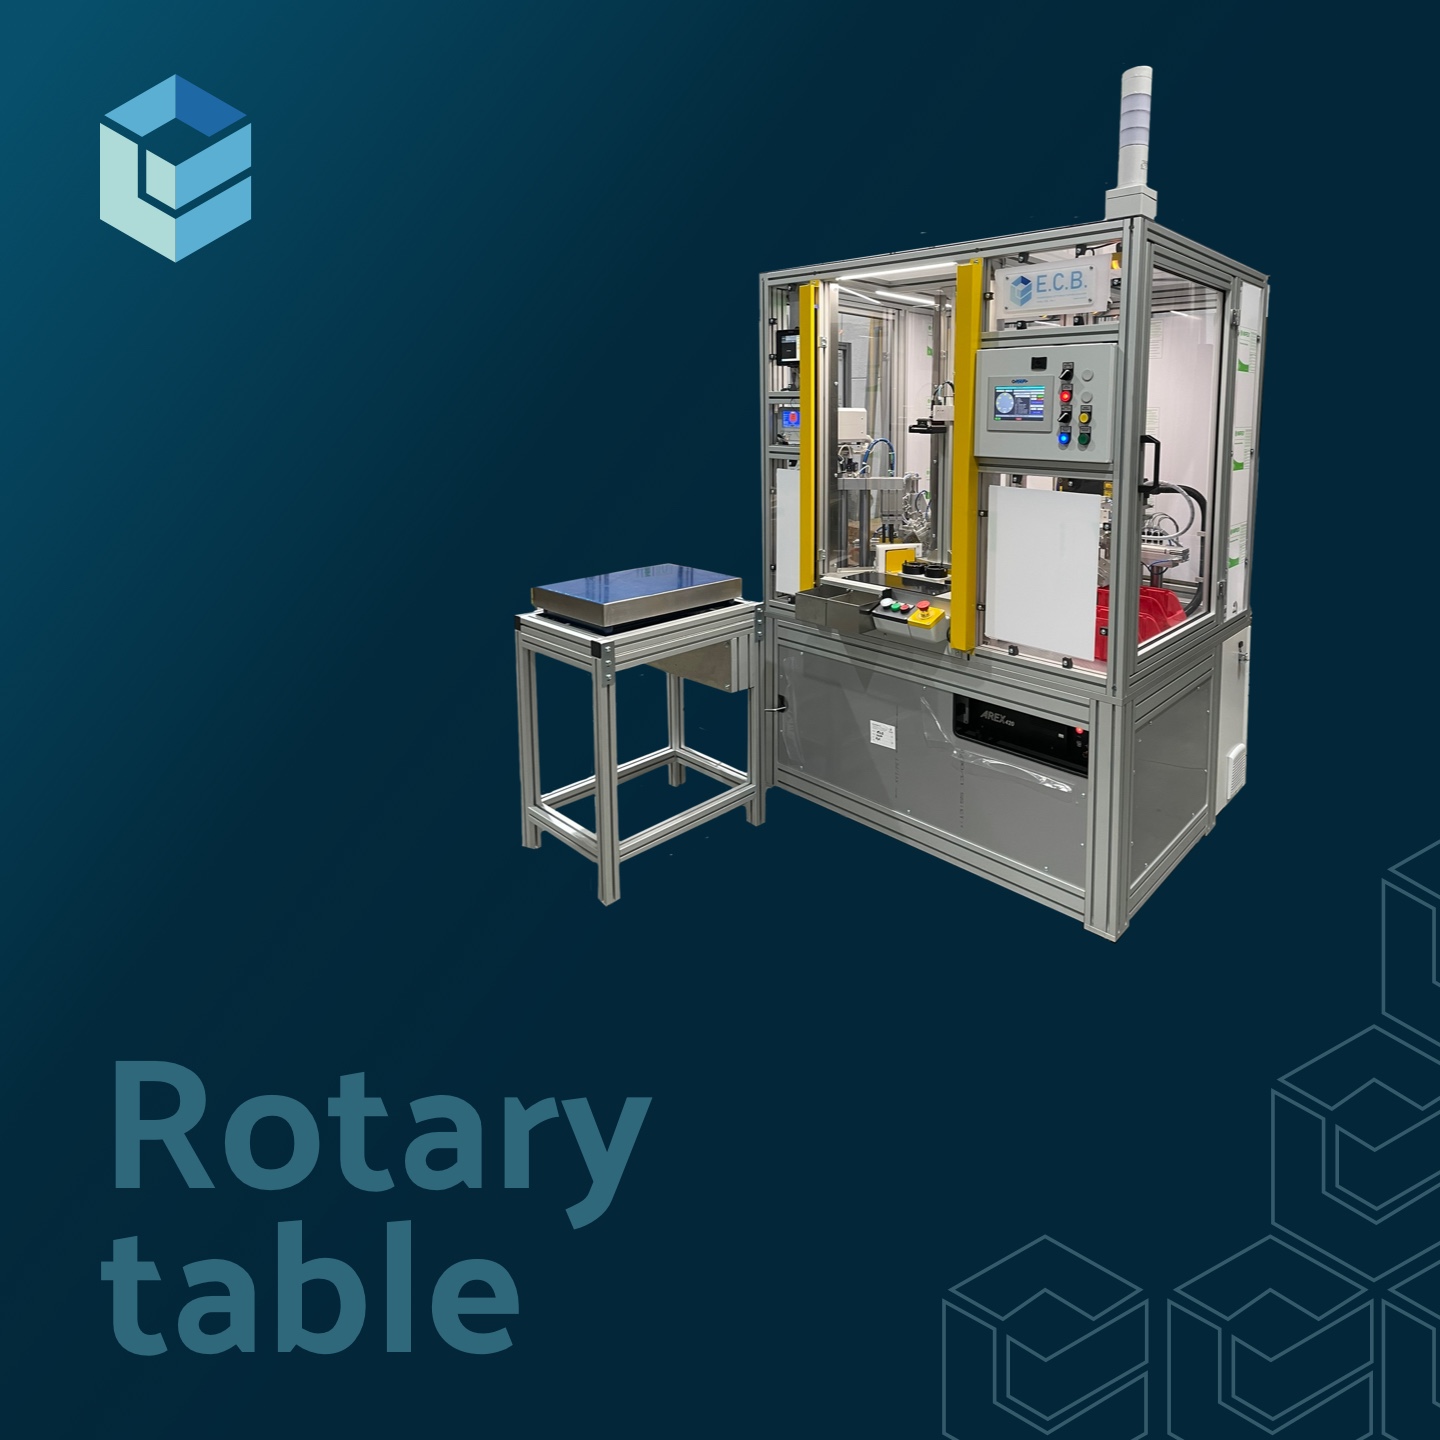 Rotary table for leak testing and component assembly for new Euro 7 Stellantis engines